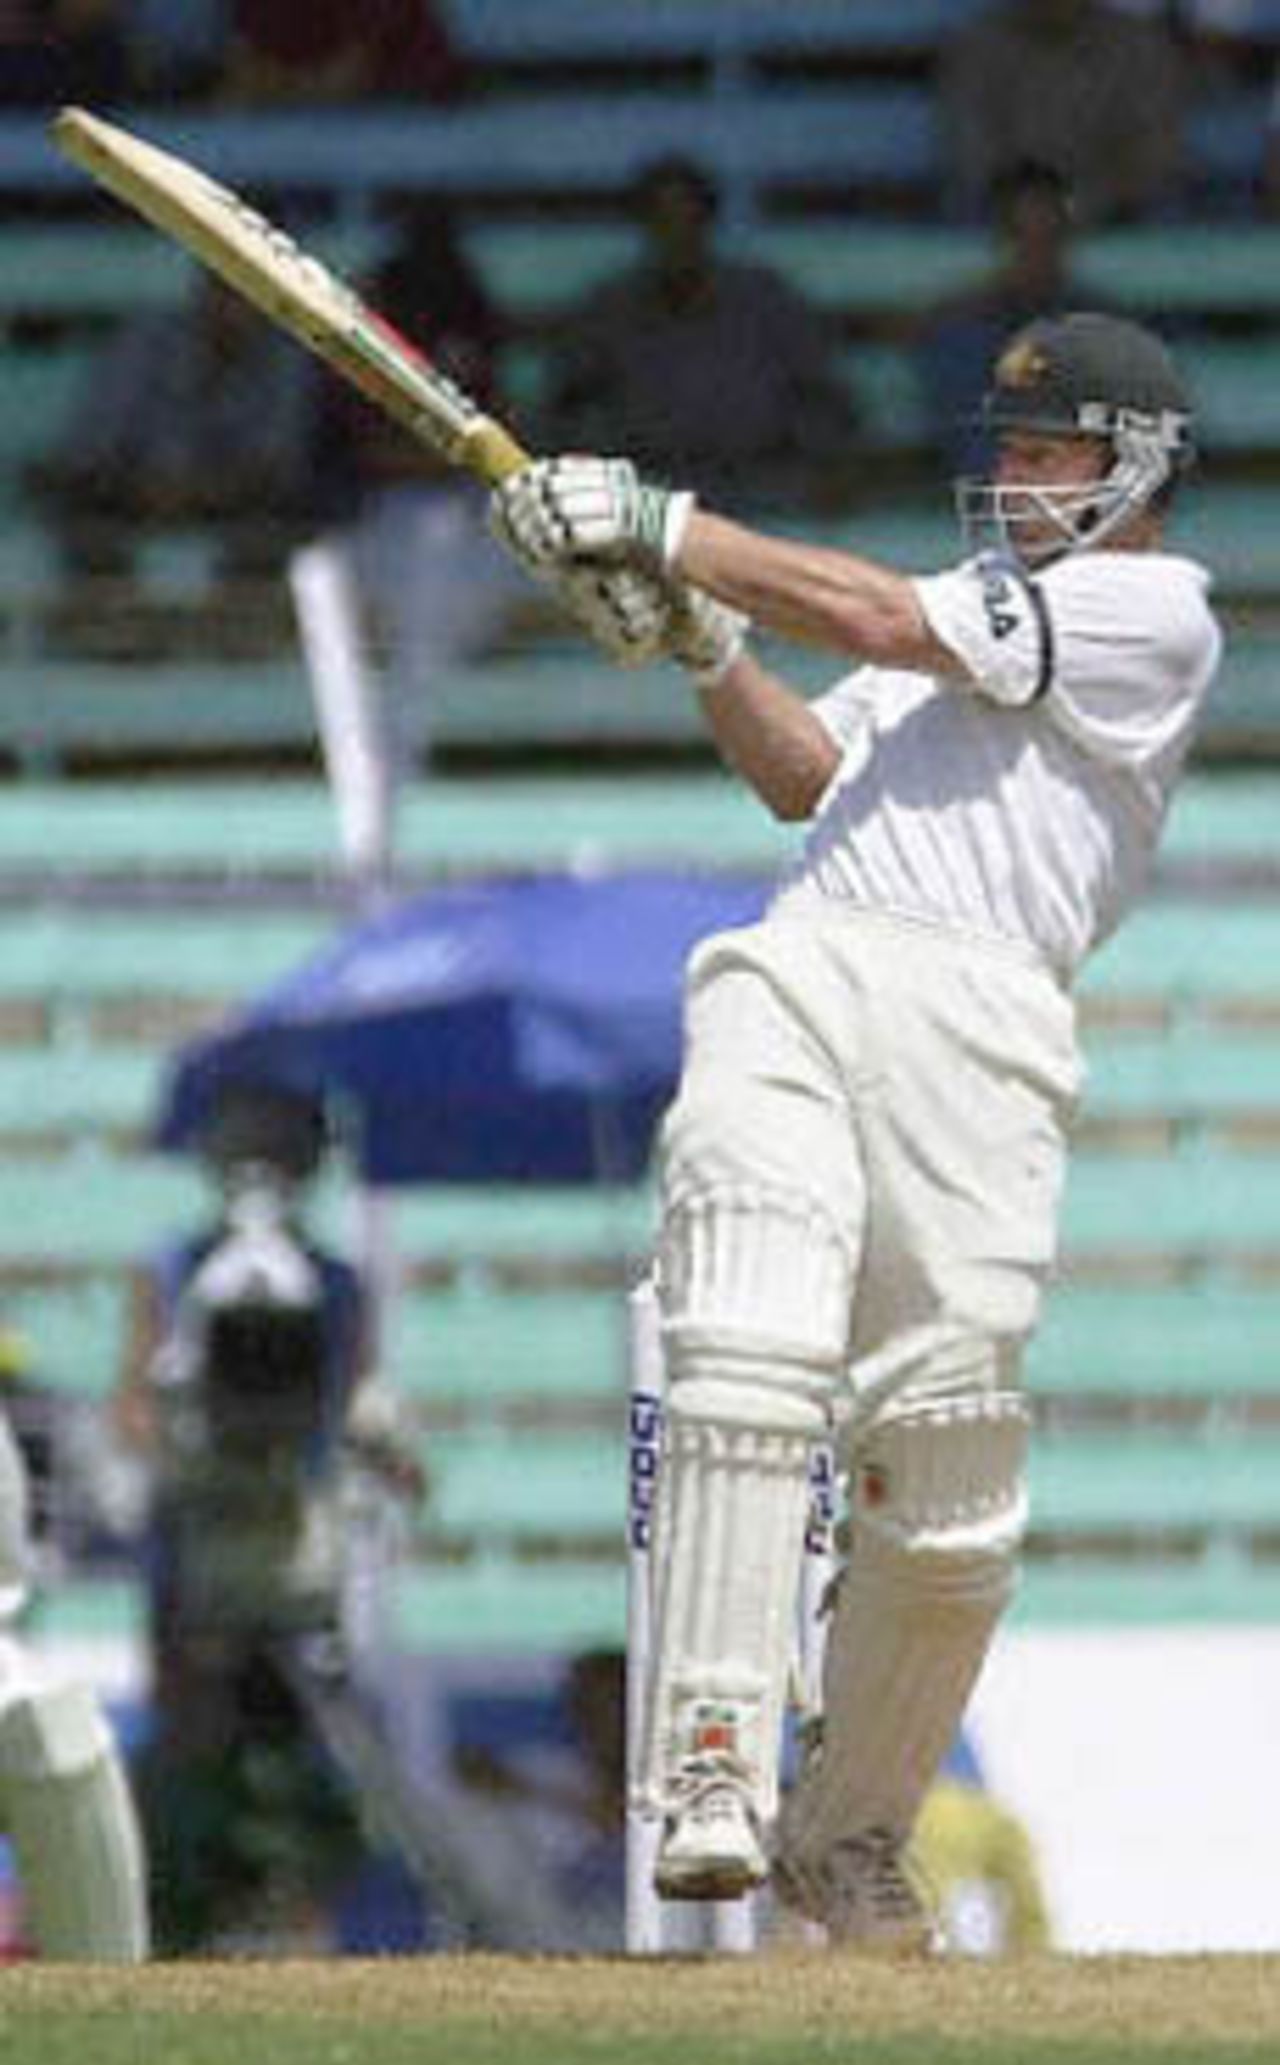 Australian batsman Adam Gilchrist pulls a delivery to the fence on way to scoring an unbeaten 103 on the second day of the first test match between India and Australia at Wankhade stadium in Bombay 28 February 2001. Gilchrist and team-mate Mathew Hayden hit centuries to put Australia in strong position at 266 for 5 after lunch in reply to India's 176 runs.